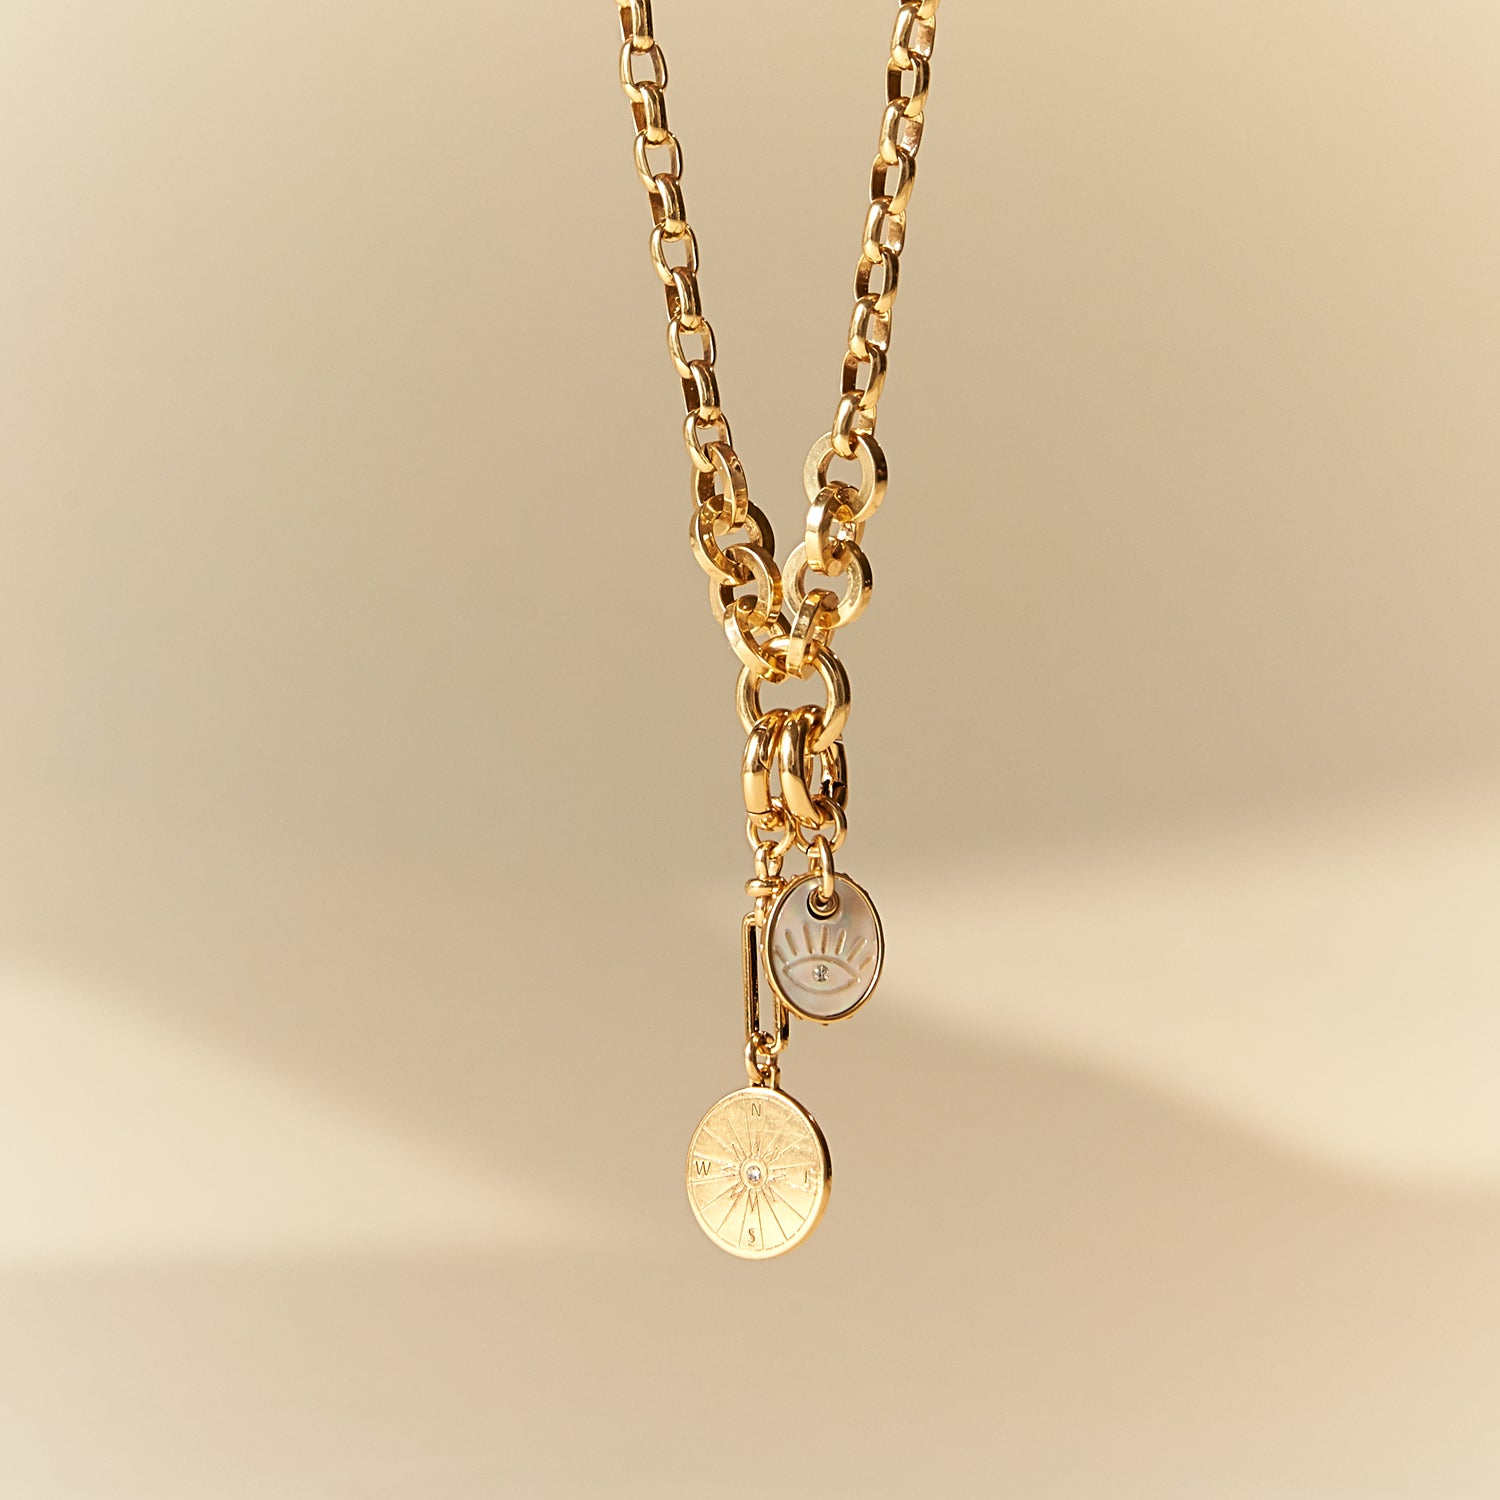 Voyager Necklace Gold by Mignonne Gavigan